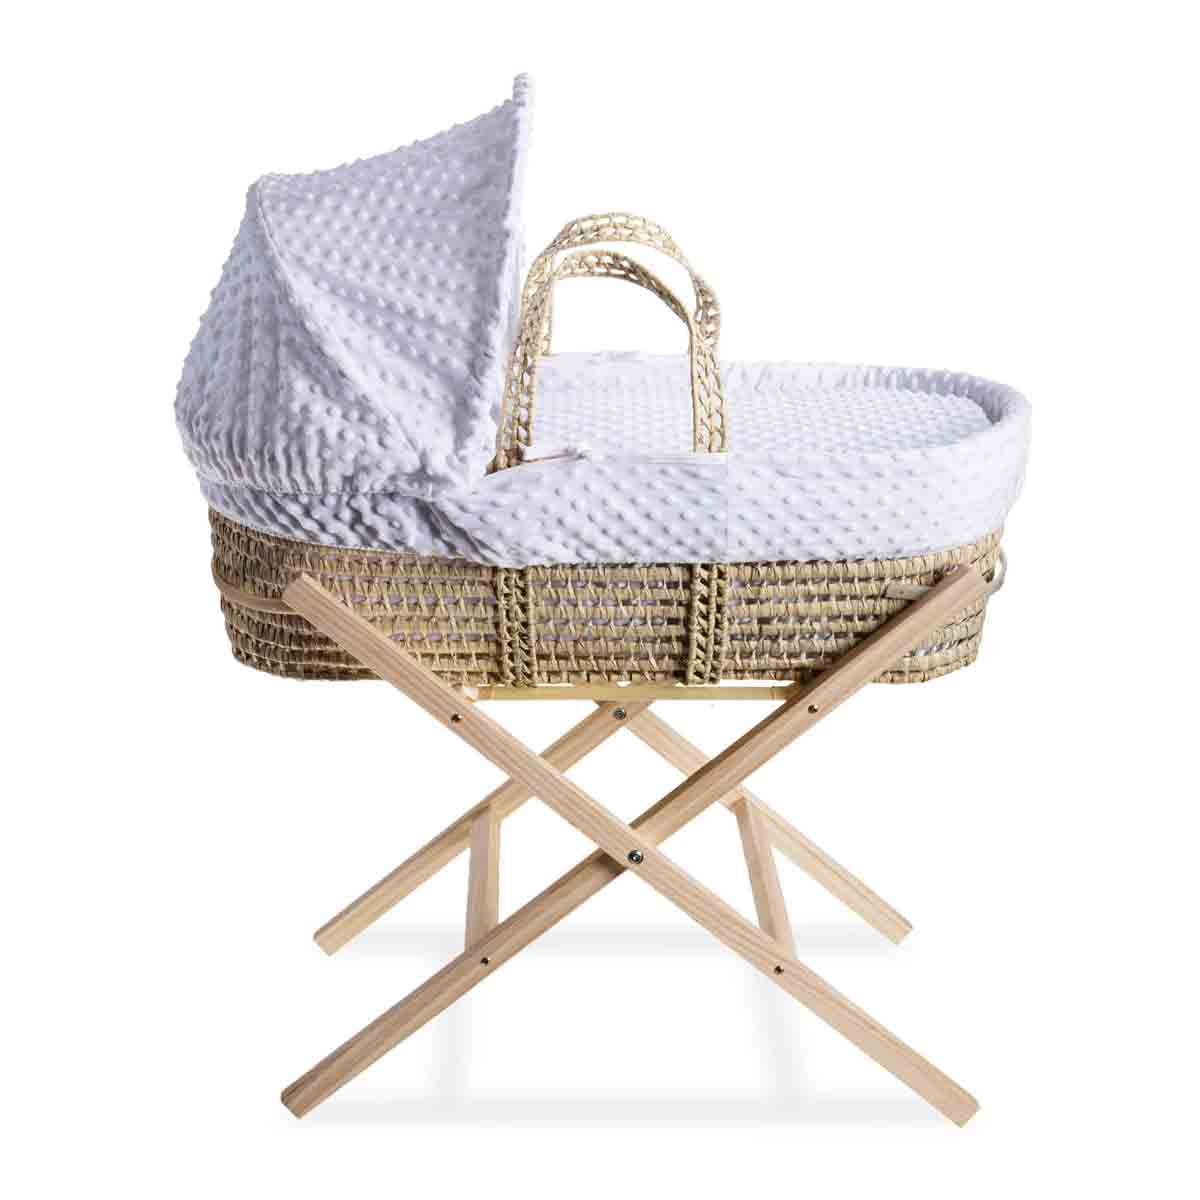 Clair de Lune Dimple Palm Moses Basket in White & Natural Folding Stand – White